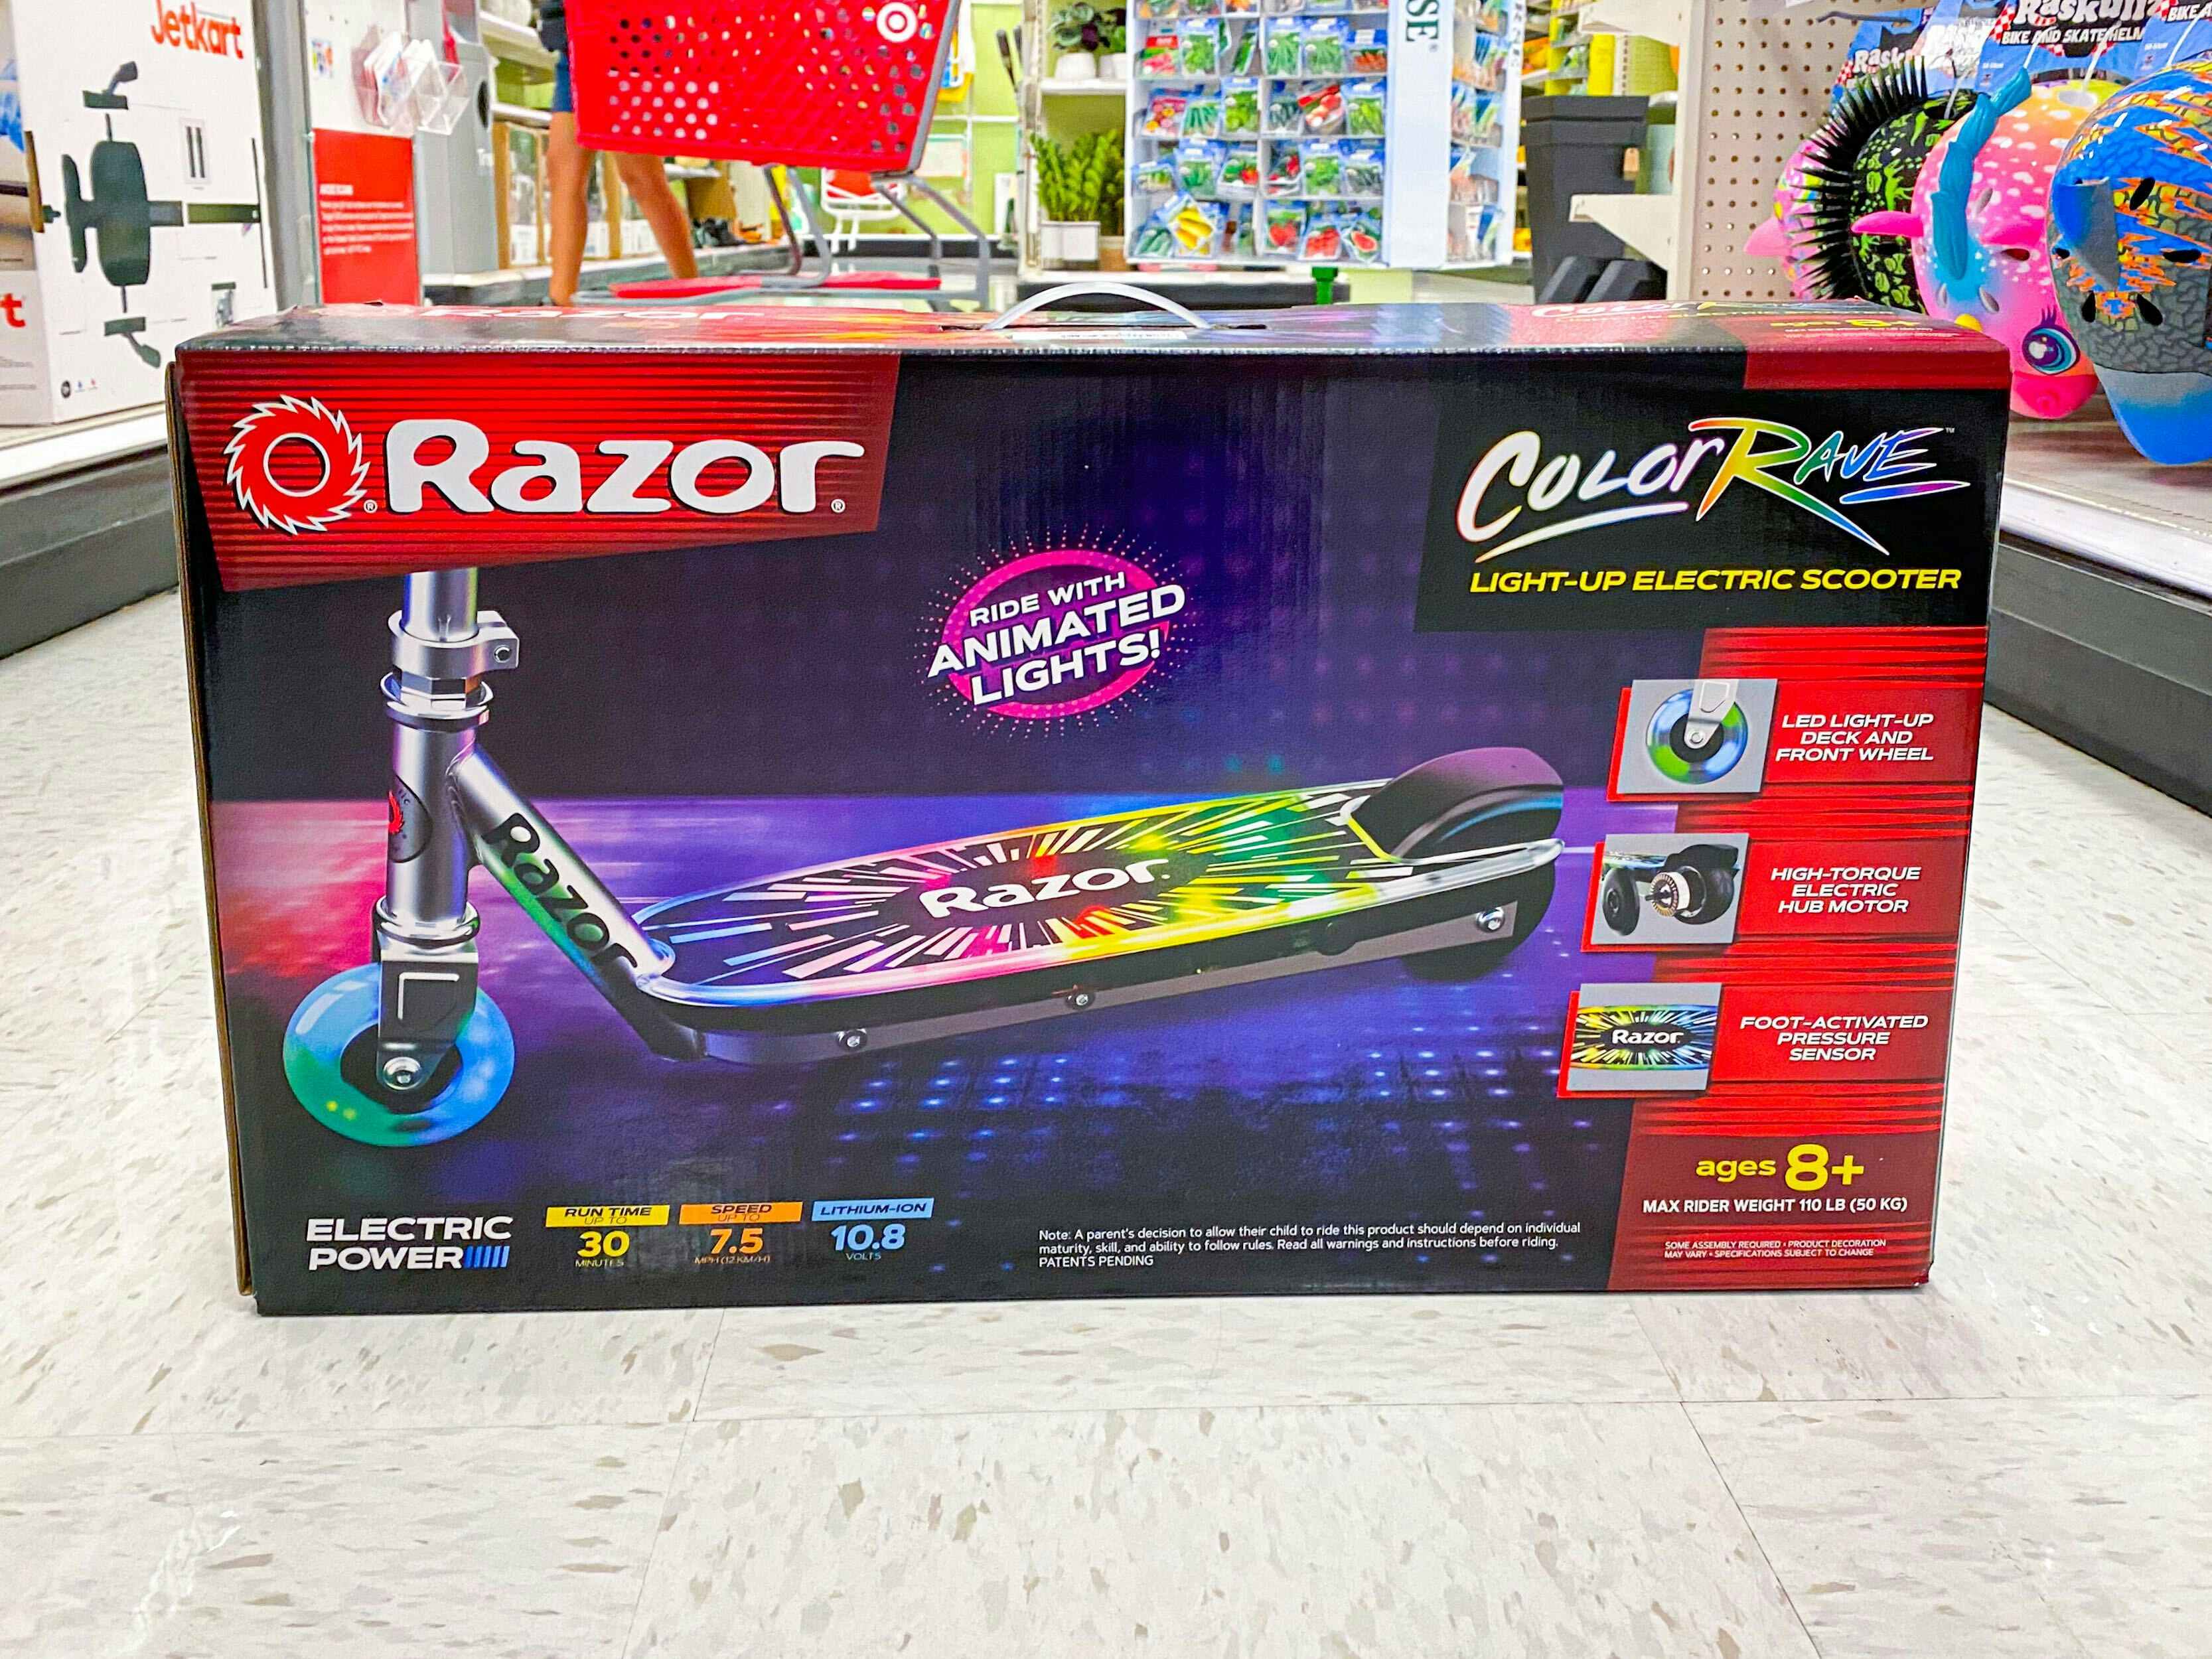 a Razor Color Wave electric scooter at Target